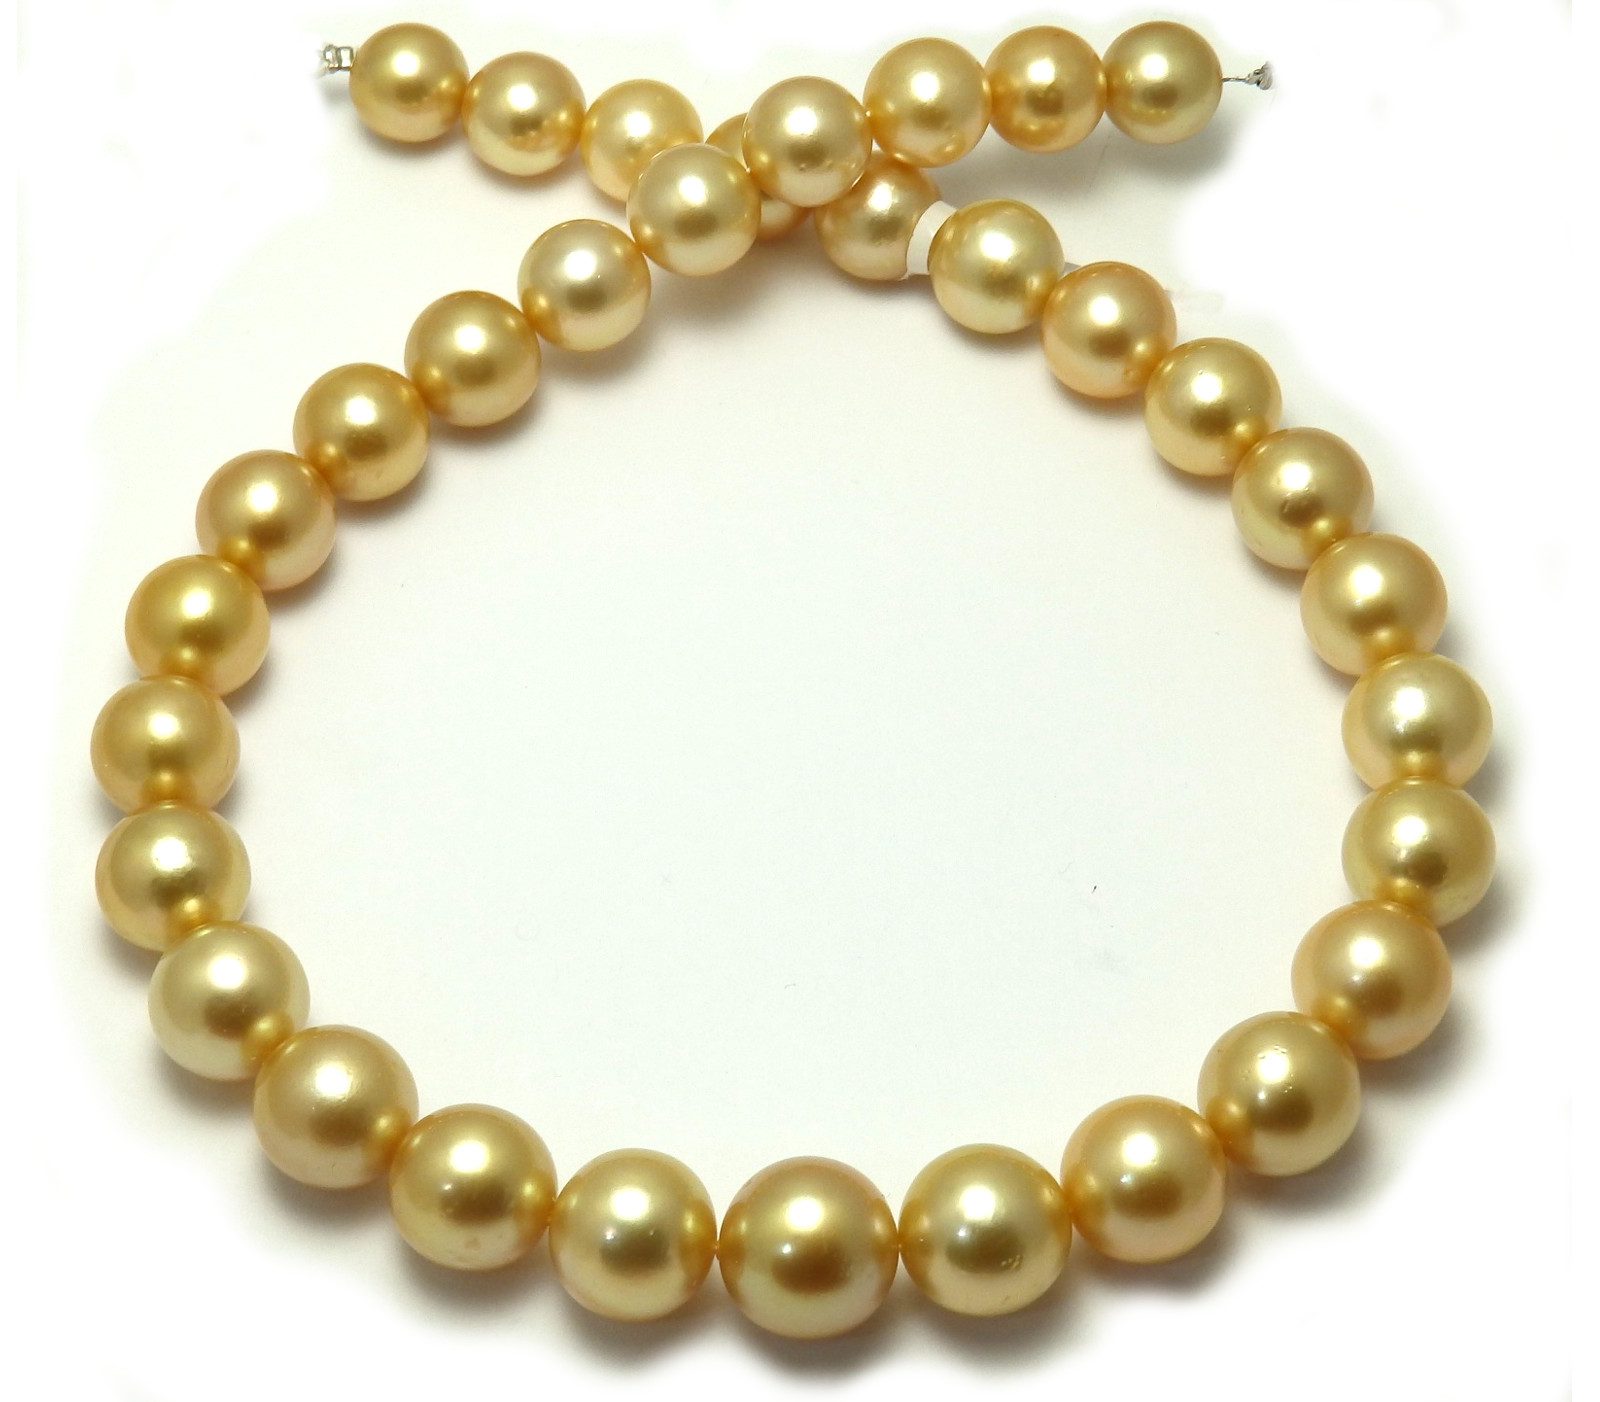 14mm Deep Golden South Sea Pearl Necklace with Round Gold Pearls